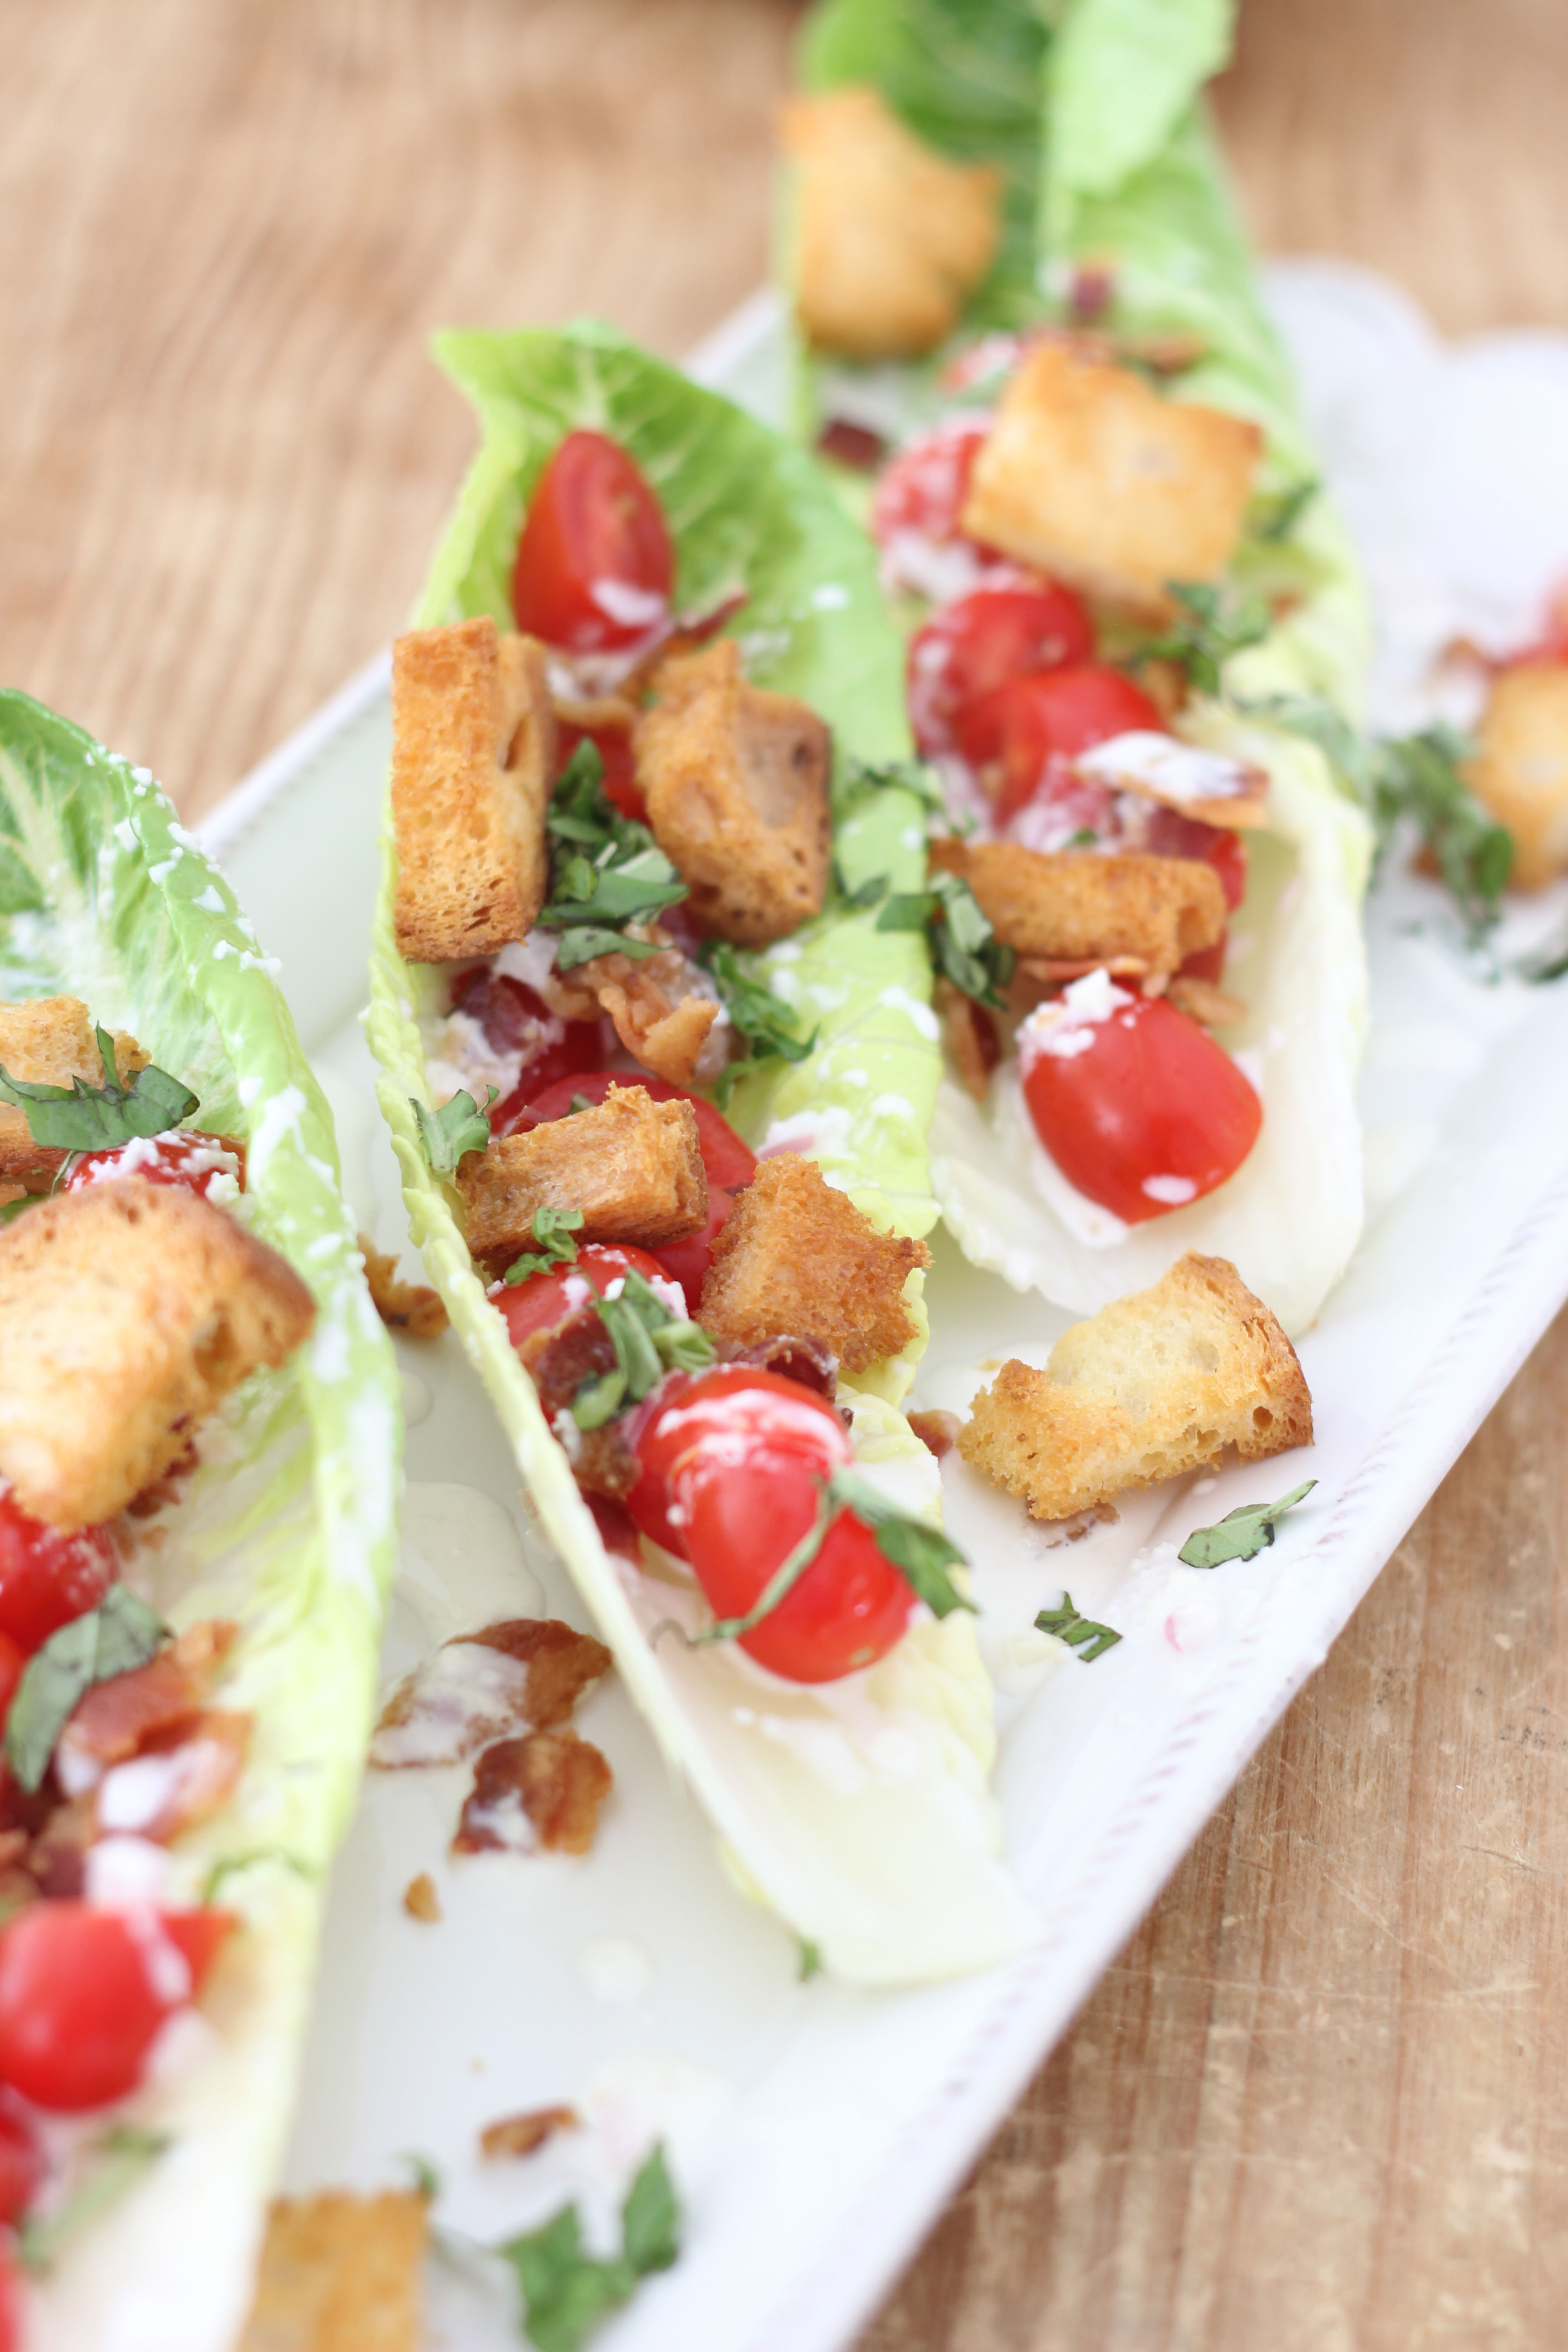 Love a BLT Sandwich? This BLT Salad with Buttermilk-Parmesan Dressing and Buttery Croutons is the next best thing.. maybe even better! YUM!